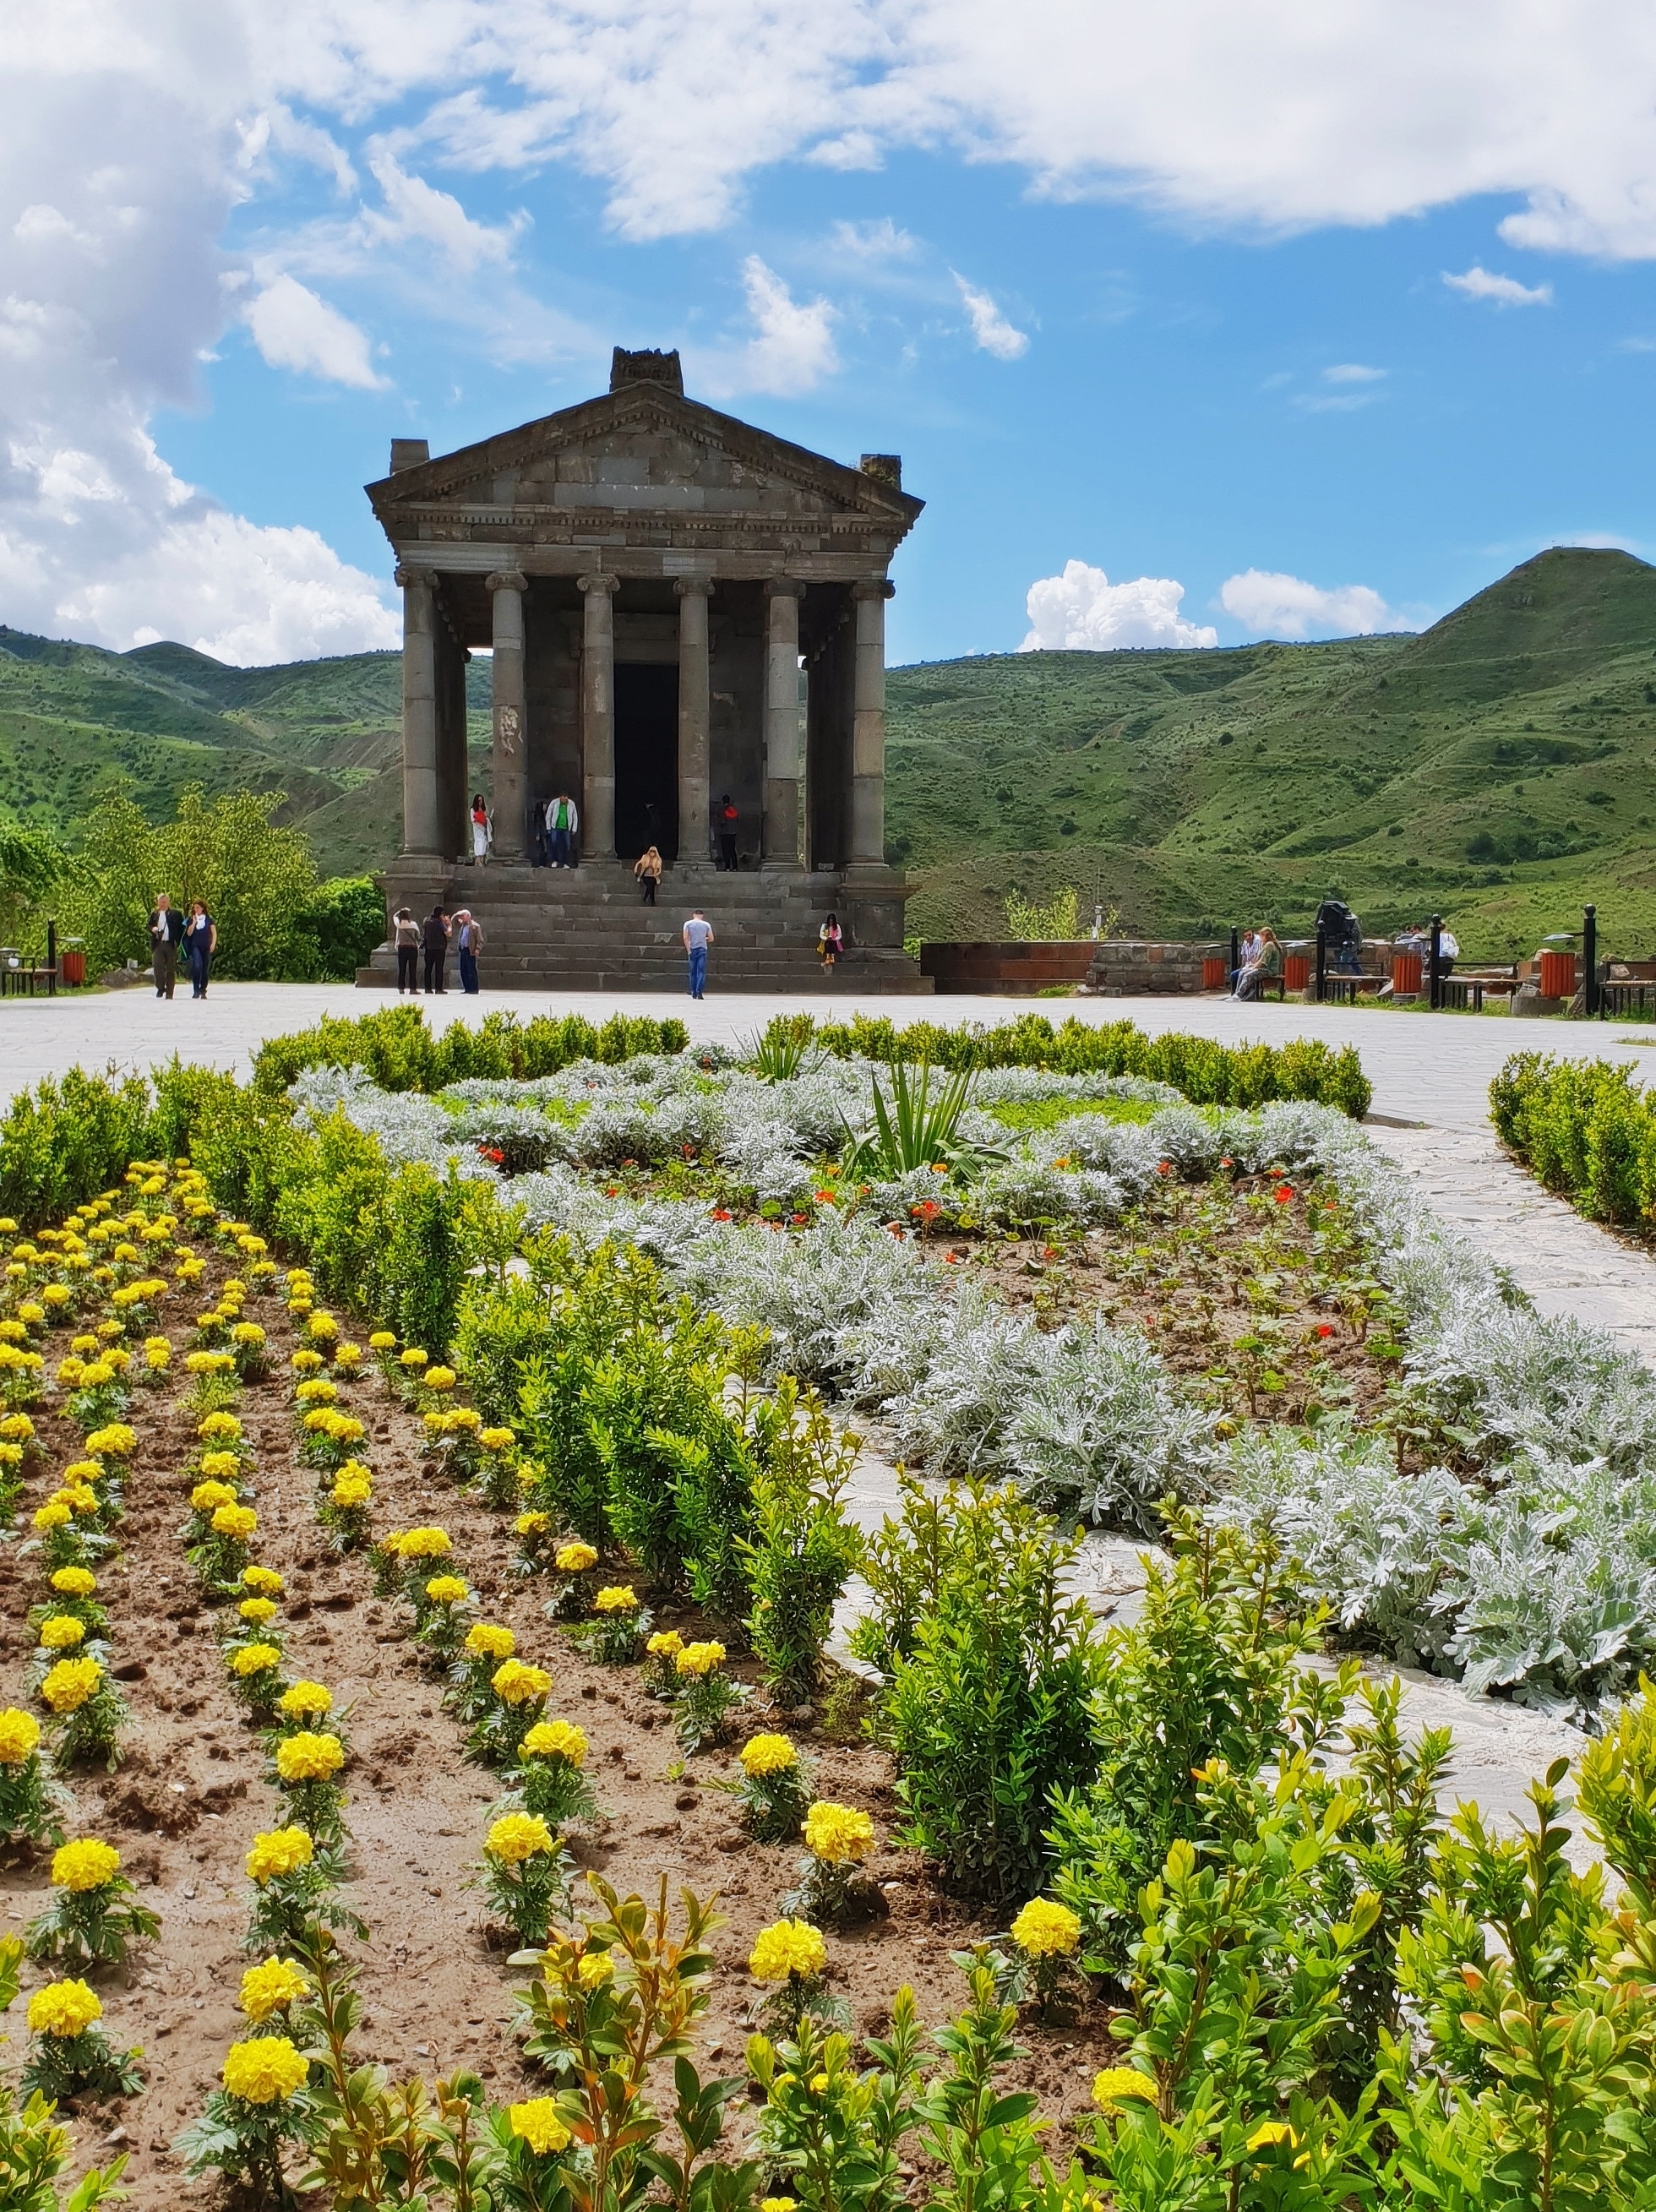 Temple of Garni is the only non-Christian entity in Armenia